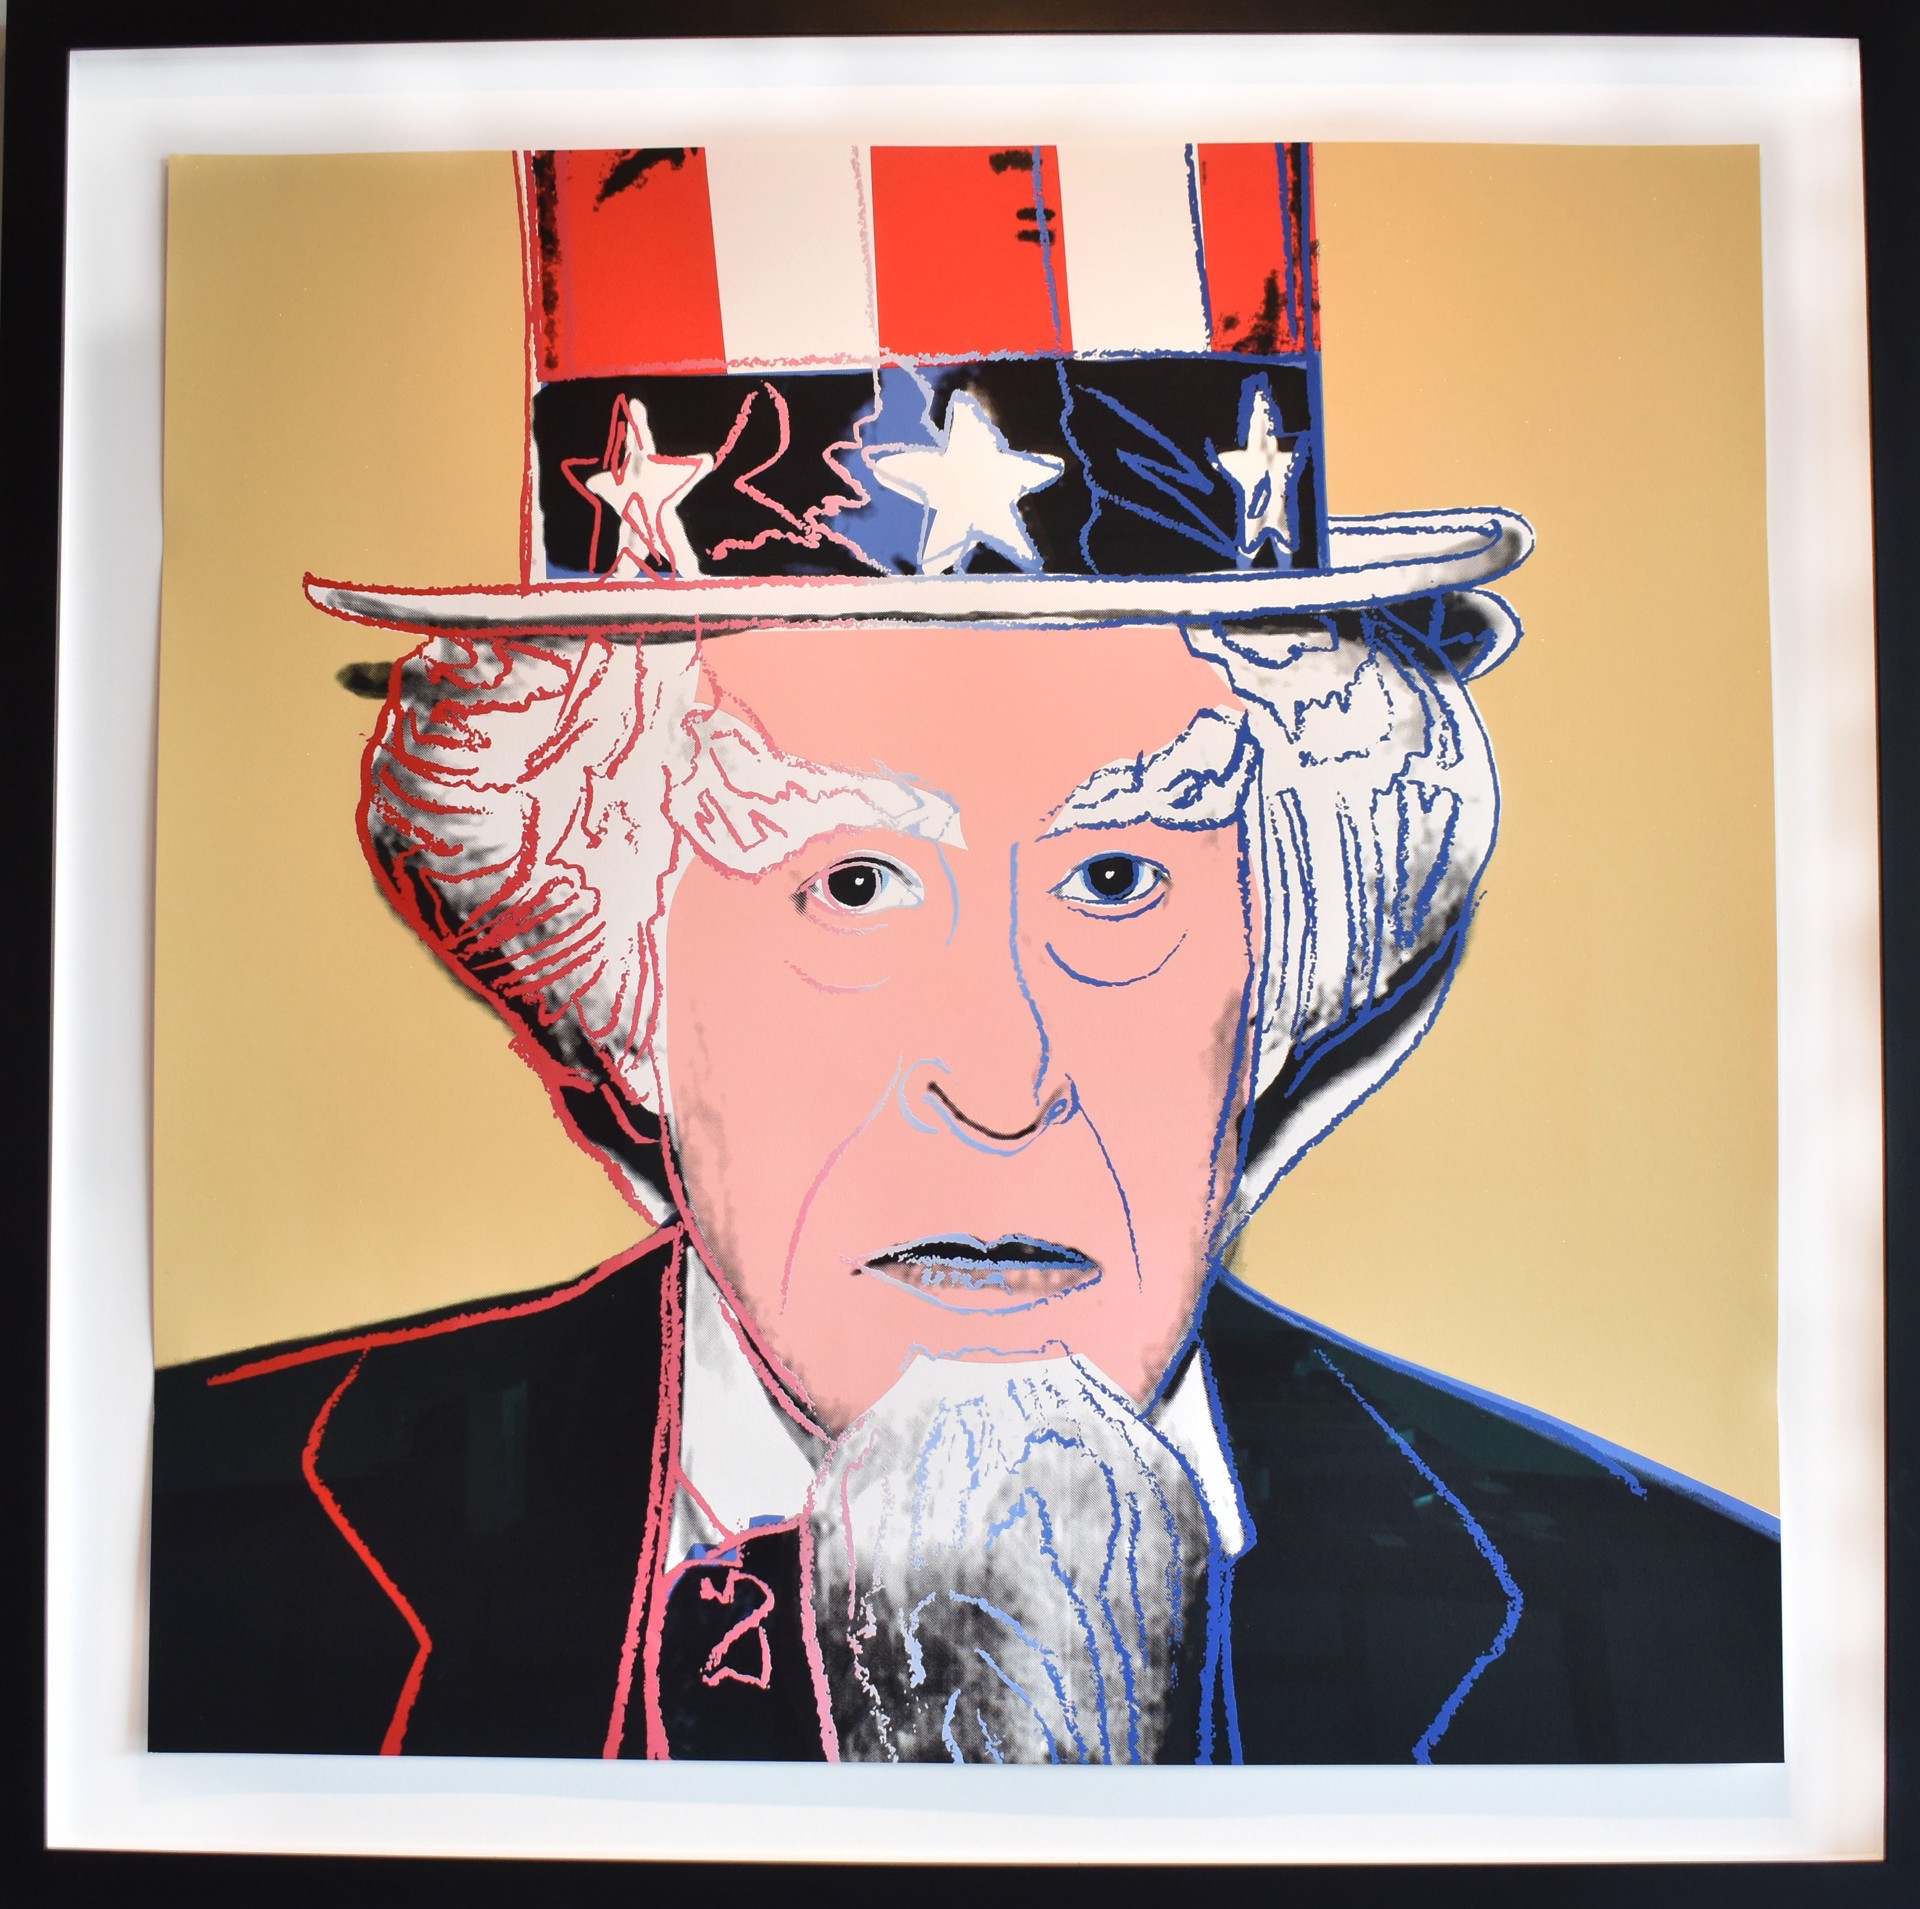 Uncle Sam (After Warhol) by Andy Warhol